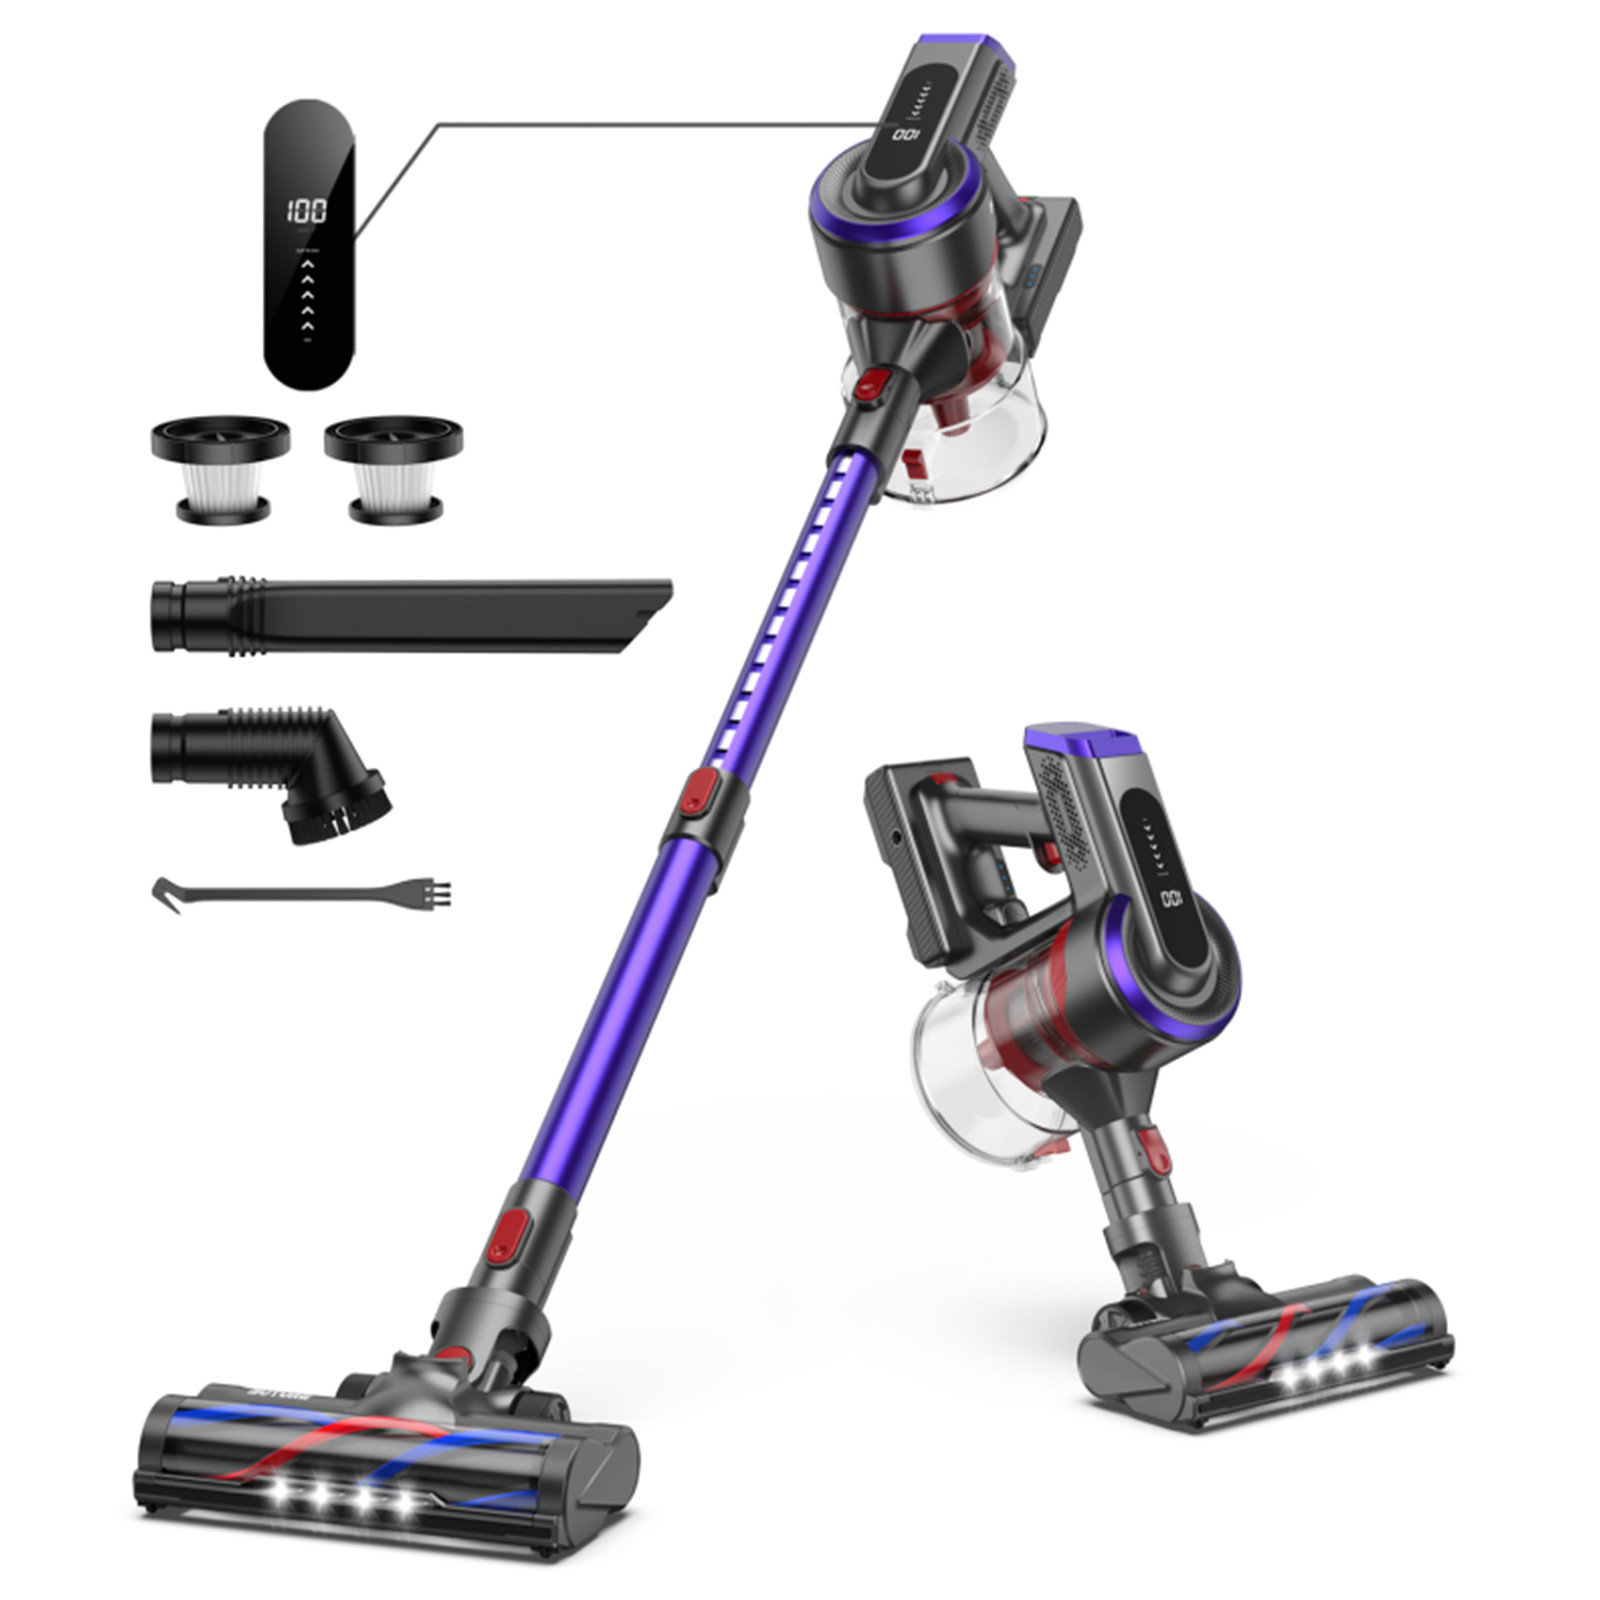  HONITURE Cordless Vacuum Cleaner, 380W 30Kpa Powerful Cordless  Stick Vacuum, 4 in 1 Lightweight Handheld Vacuum with 180 Foldable Tube  2500mAh*7 Battery for Home Hard Floor/Carpet/Bed/Pet Hair